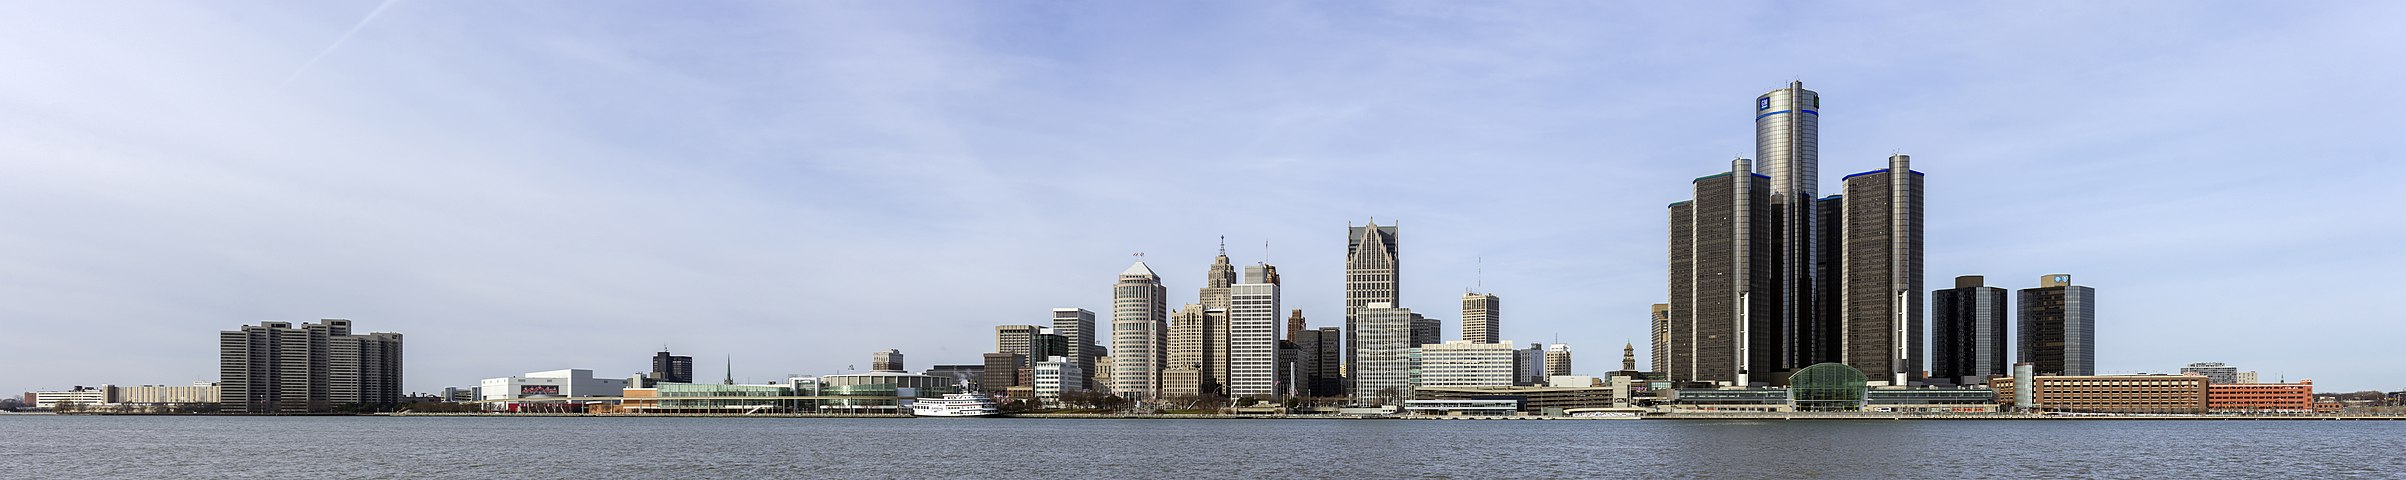 Although the city may have temporarily gone bankrupt, Detroit's riverside still reflects the city's heyday as a center of car production and music. This panorama, a stitch of three rows of ten images, shows the Detroit International Riverfront from the Riverfront Condominiums in the east to the Renaissance Center in the west.